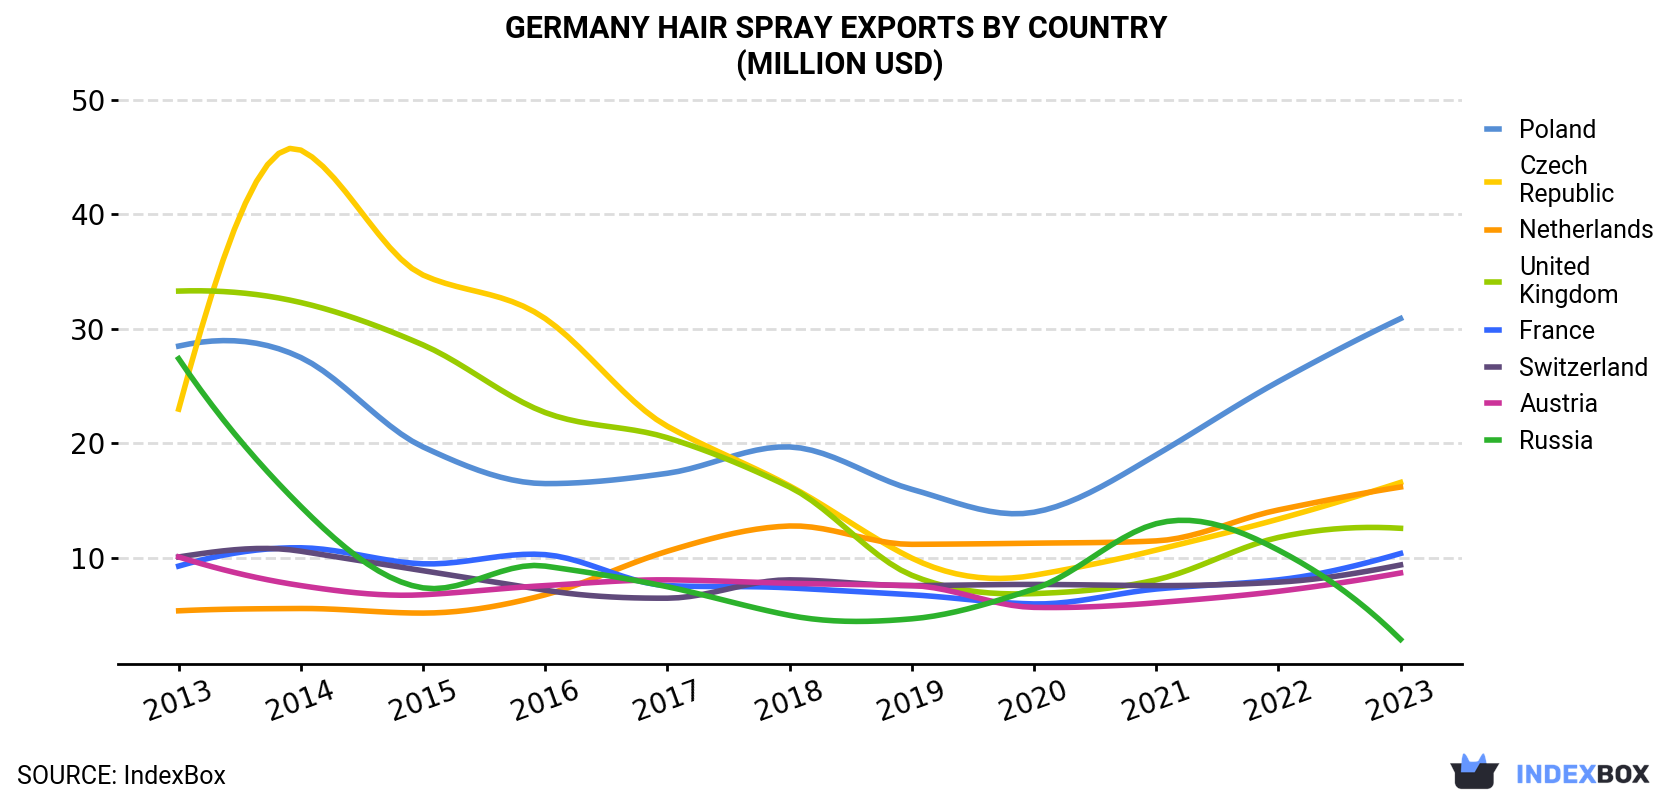 Germany Hair Spray Exports By Country (Million USD)